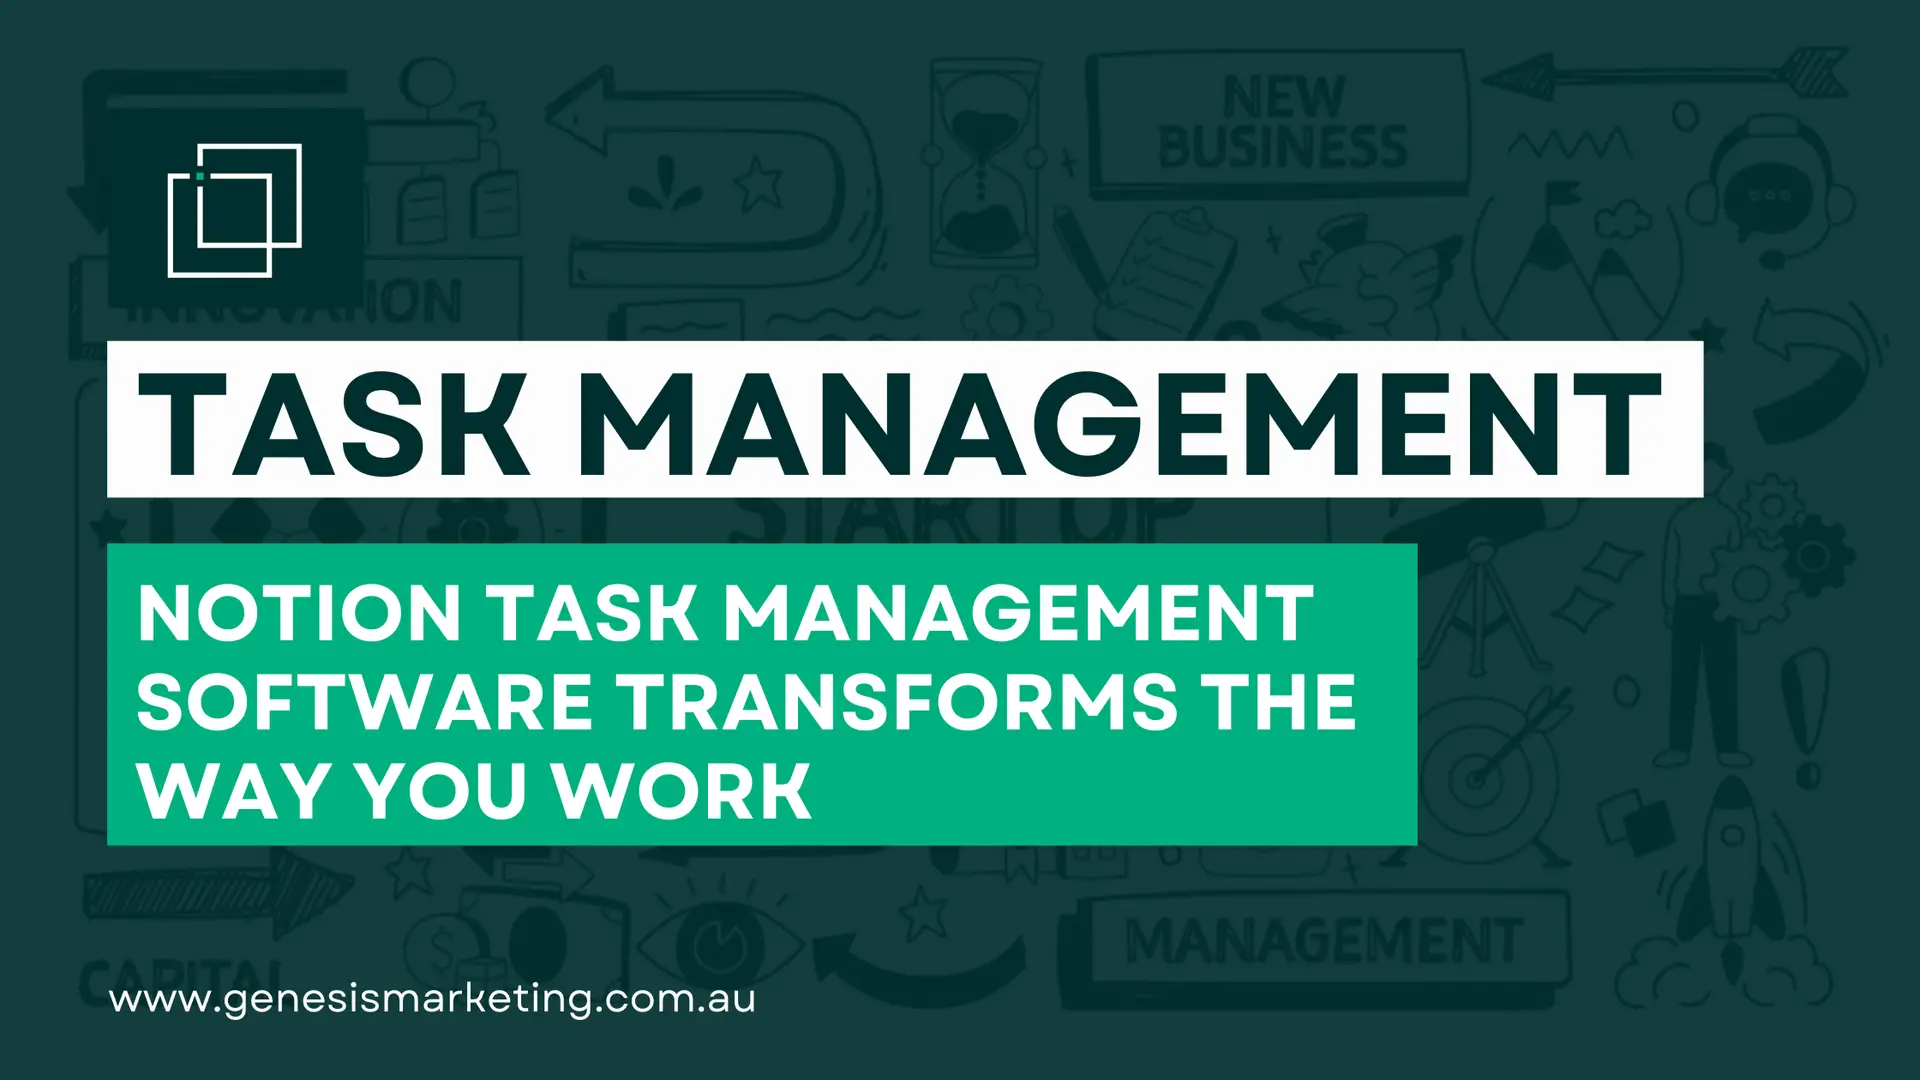 Notion Task Management Software Transforms the Way You Work